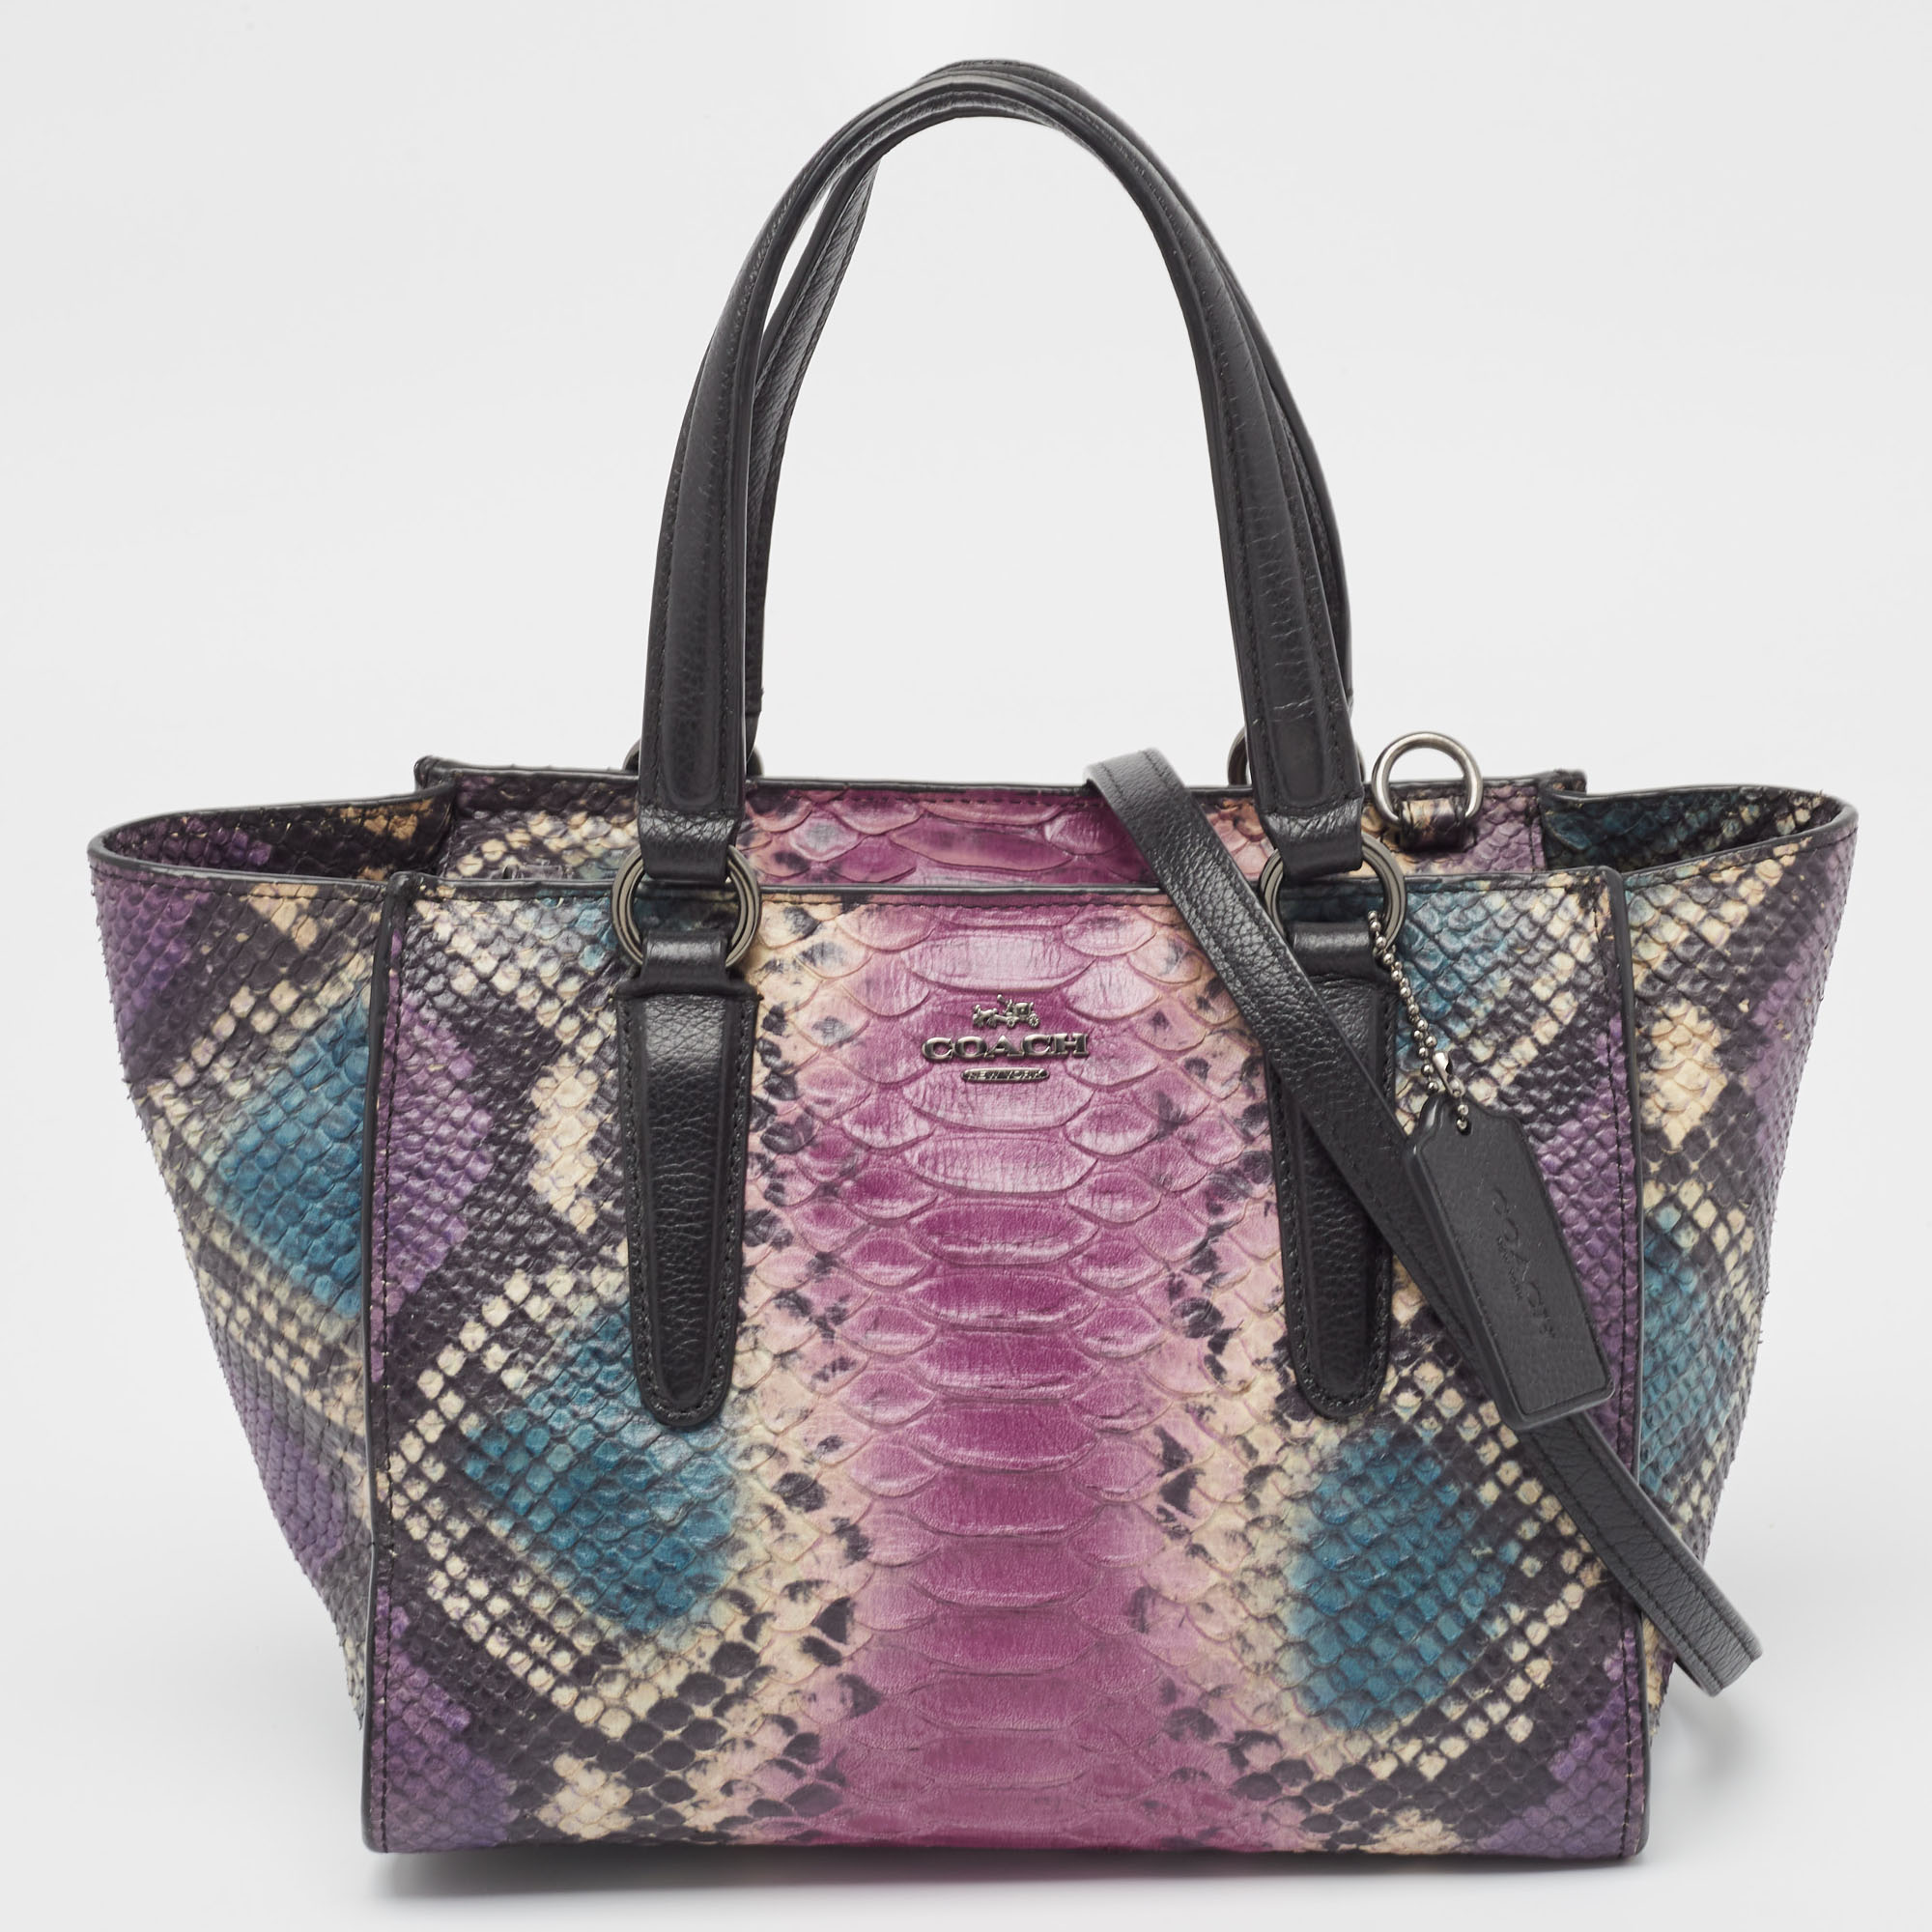 Coach multicolor python embossed and leather crosby carryall tote